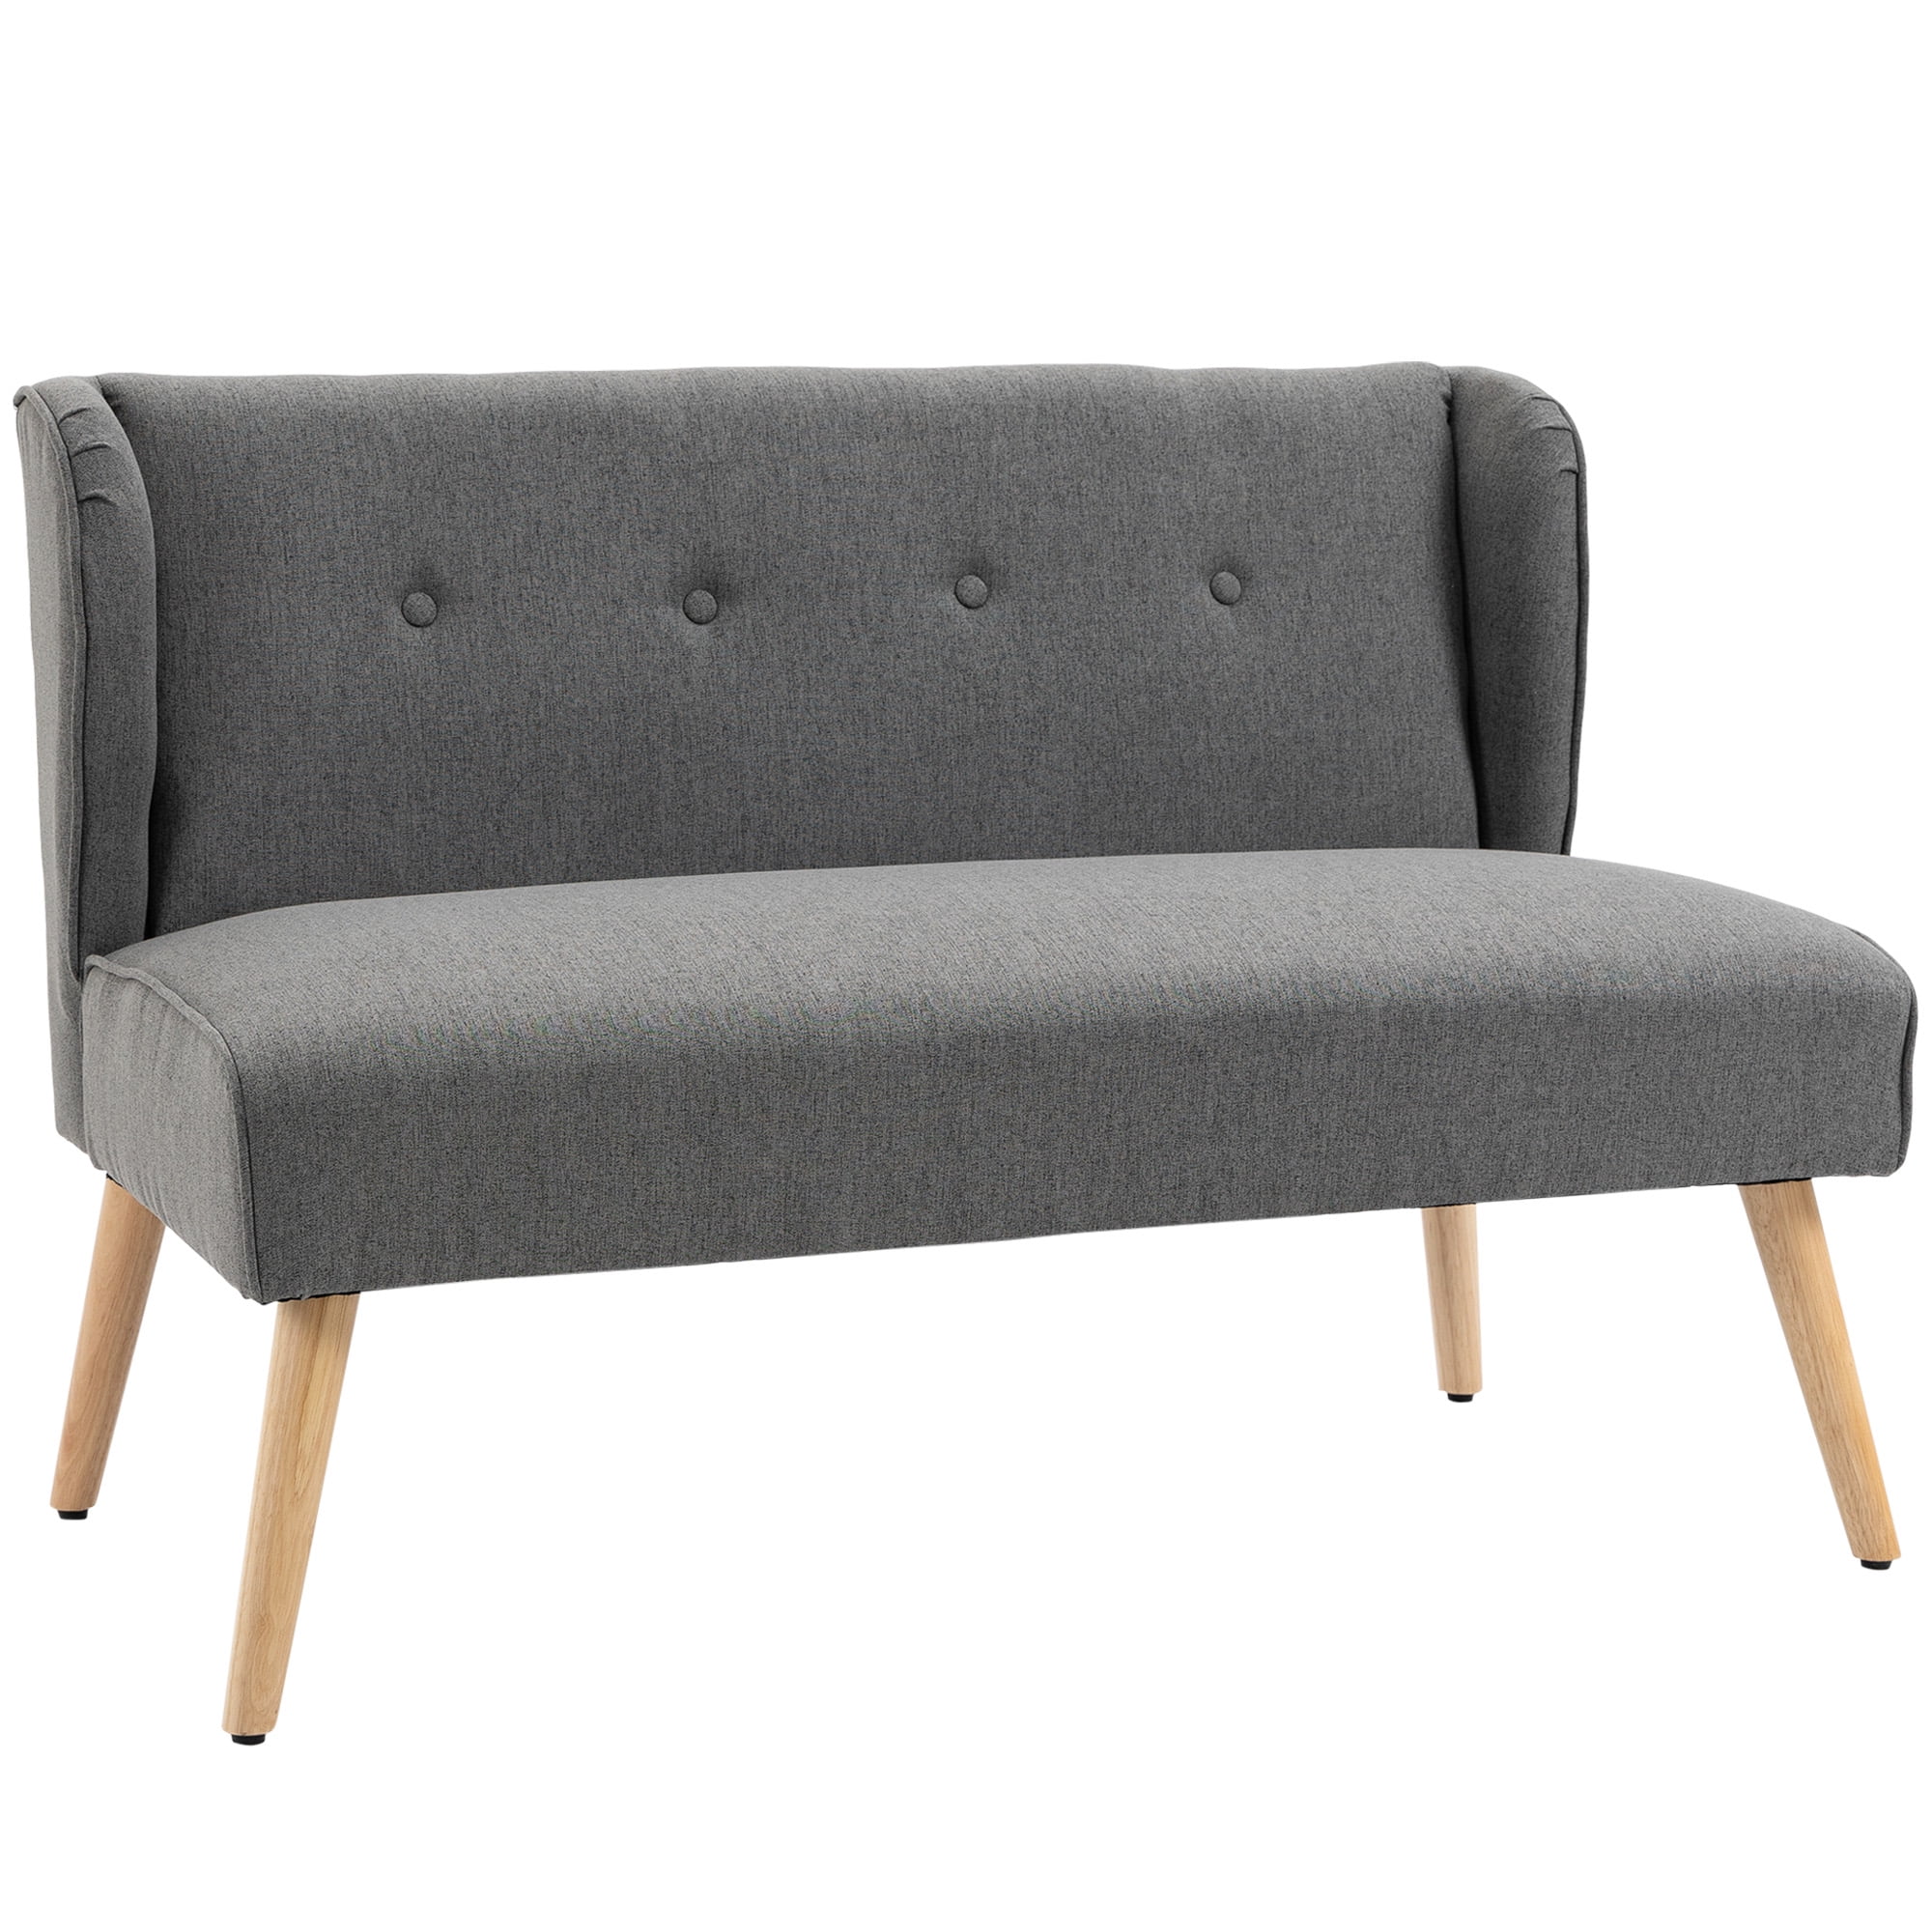 HOMCOM Modern 45" Tufted Upholstered Sofa Couch with Rubberwood Legs for Living Room, Grey - Walmart.com